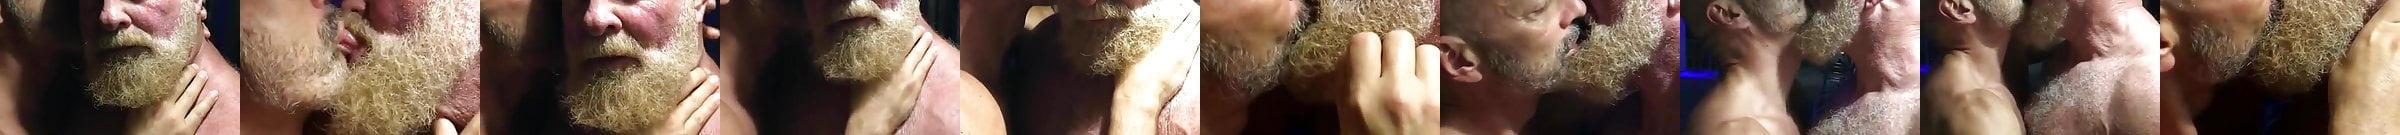 Sucking And Eating Cum Of Hairy Moustache Daddy Gay Xhamster